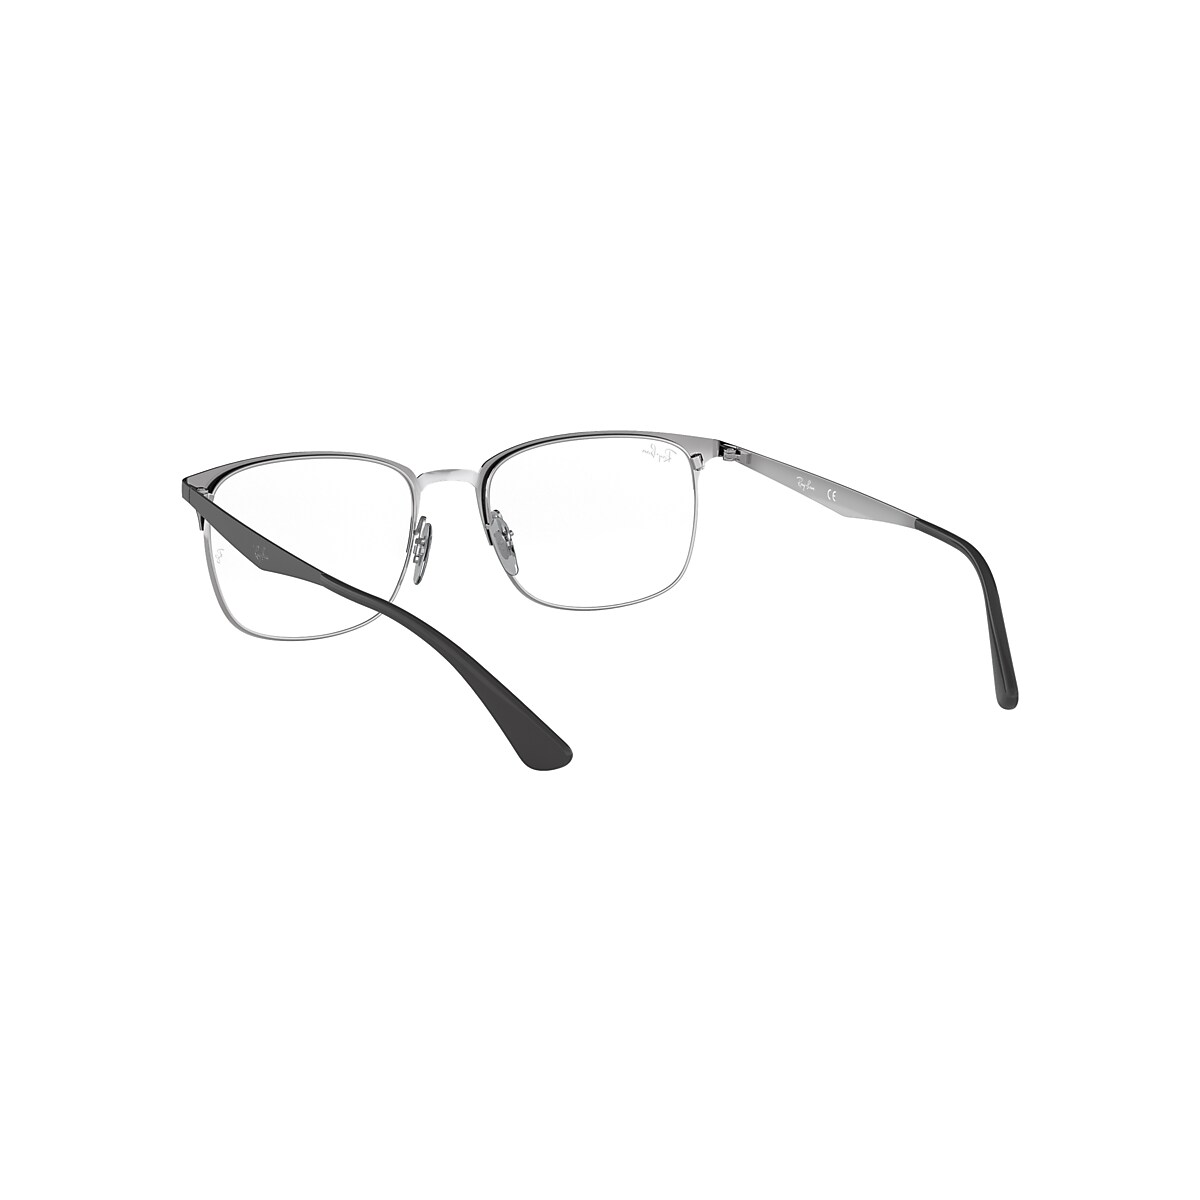 Sea anemone audience Worthless Rb6421 Eyeglasses with Grey Frame | Ray-Ban®